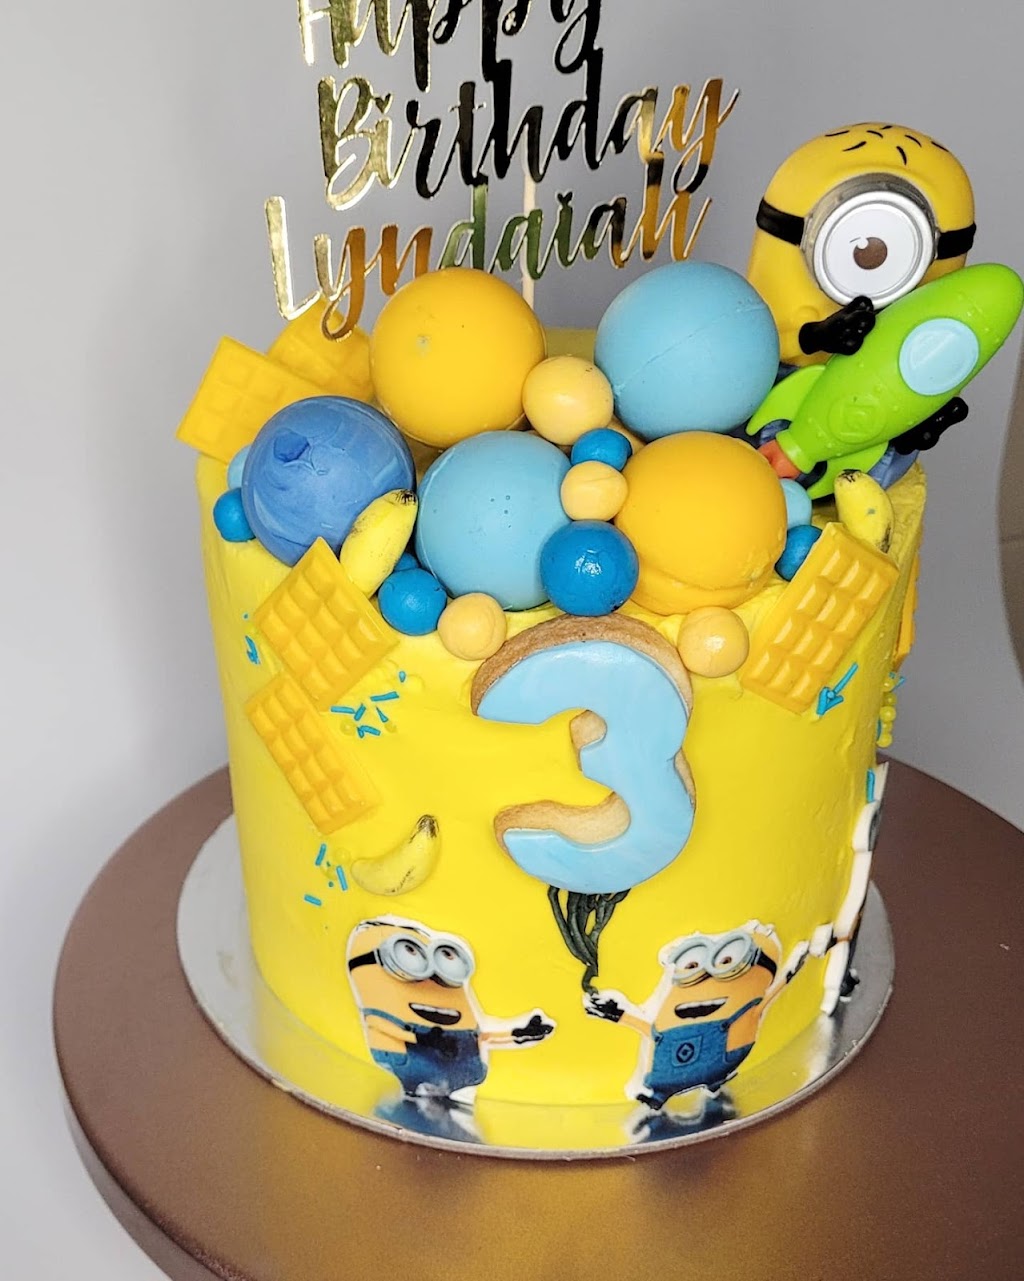 Sweet Creations by Amy | bakery | 14 Clancy St, East Innisfail QLD 4860, Australia | 0404107580 OR +61 404 107 580